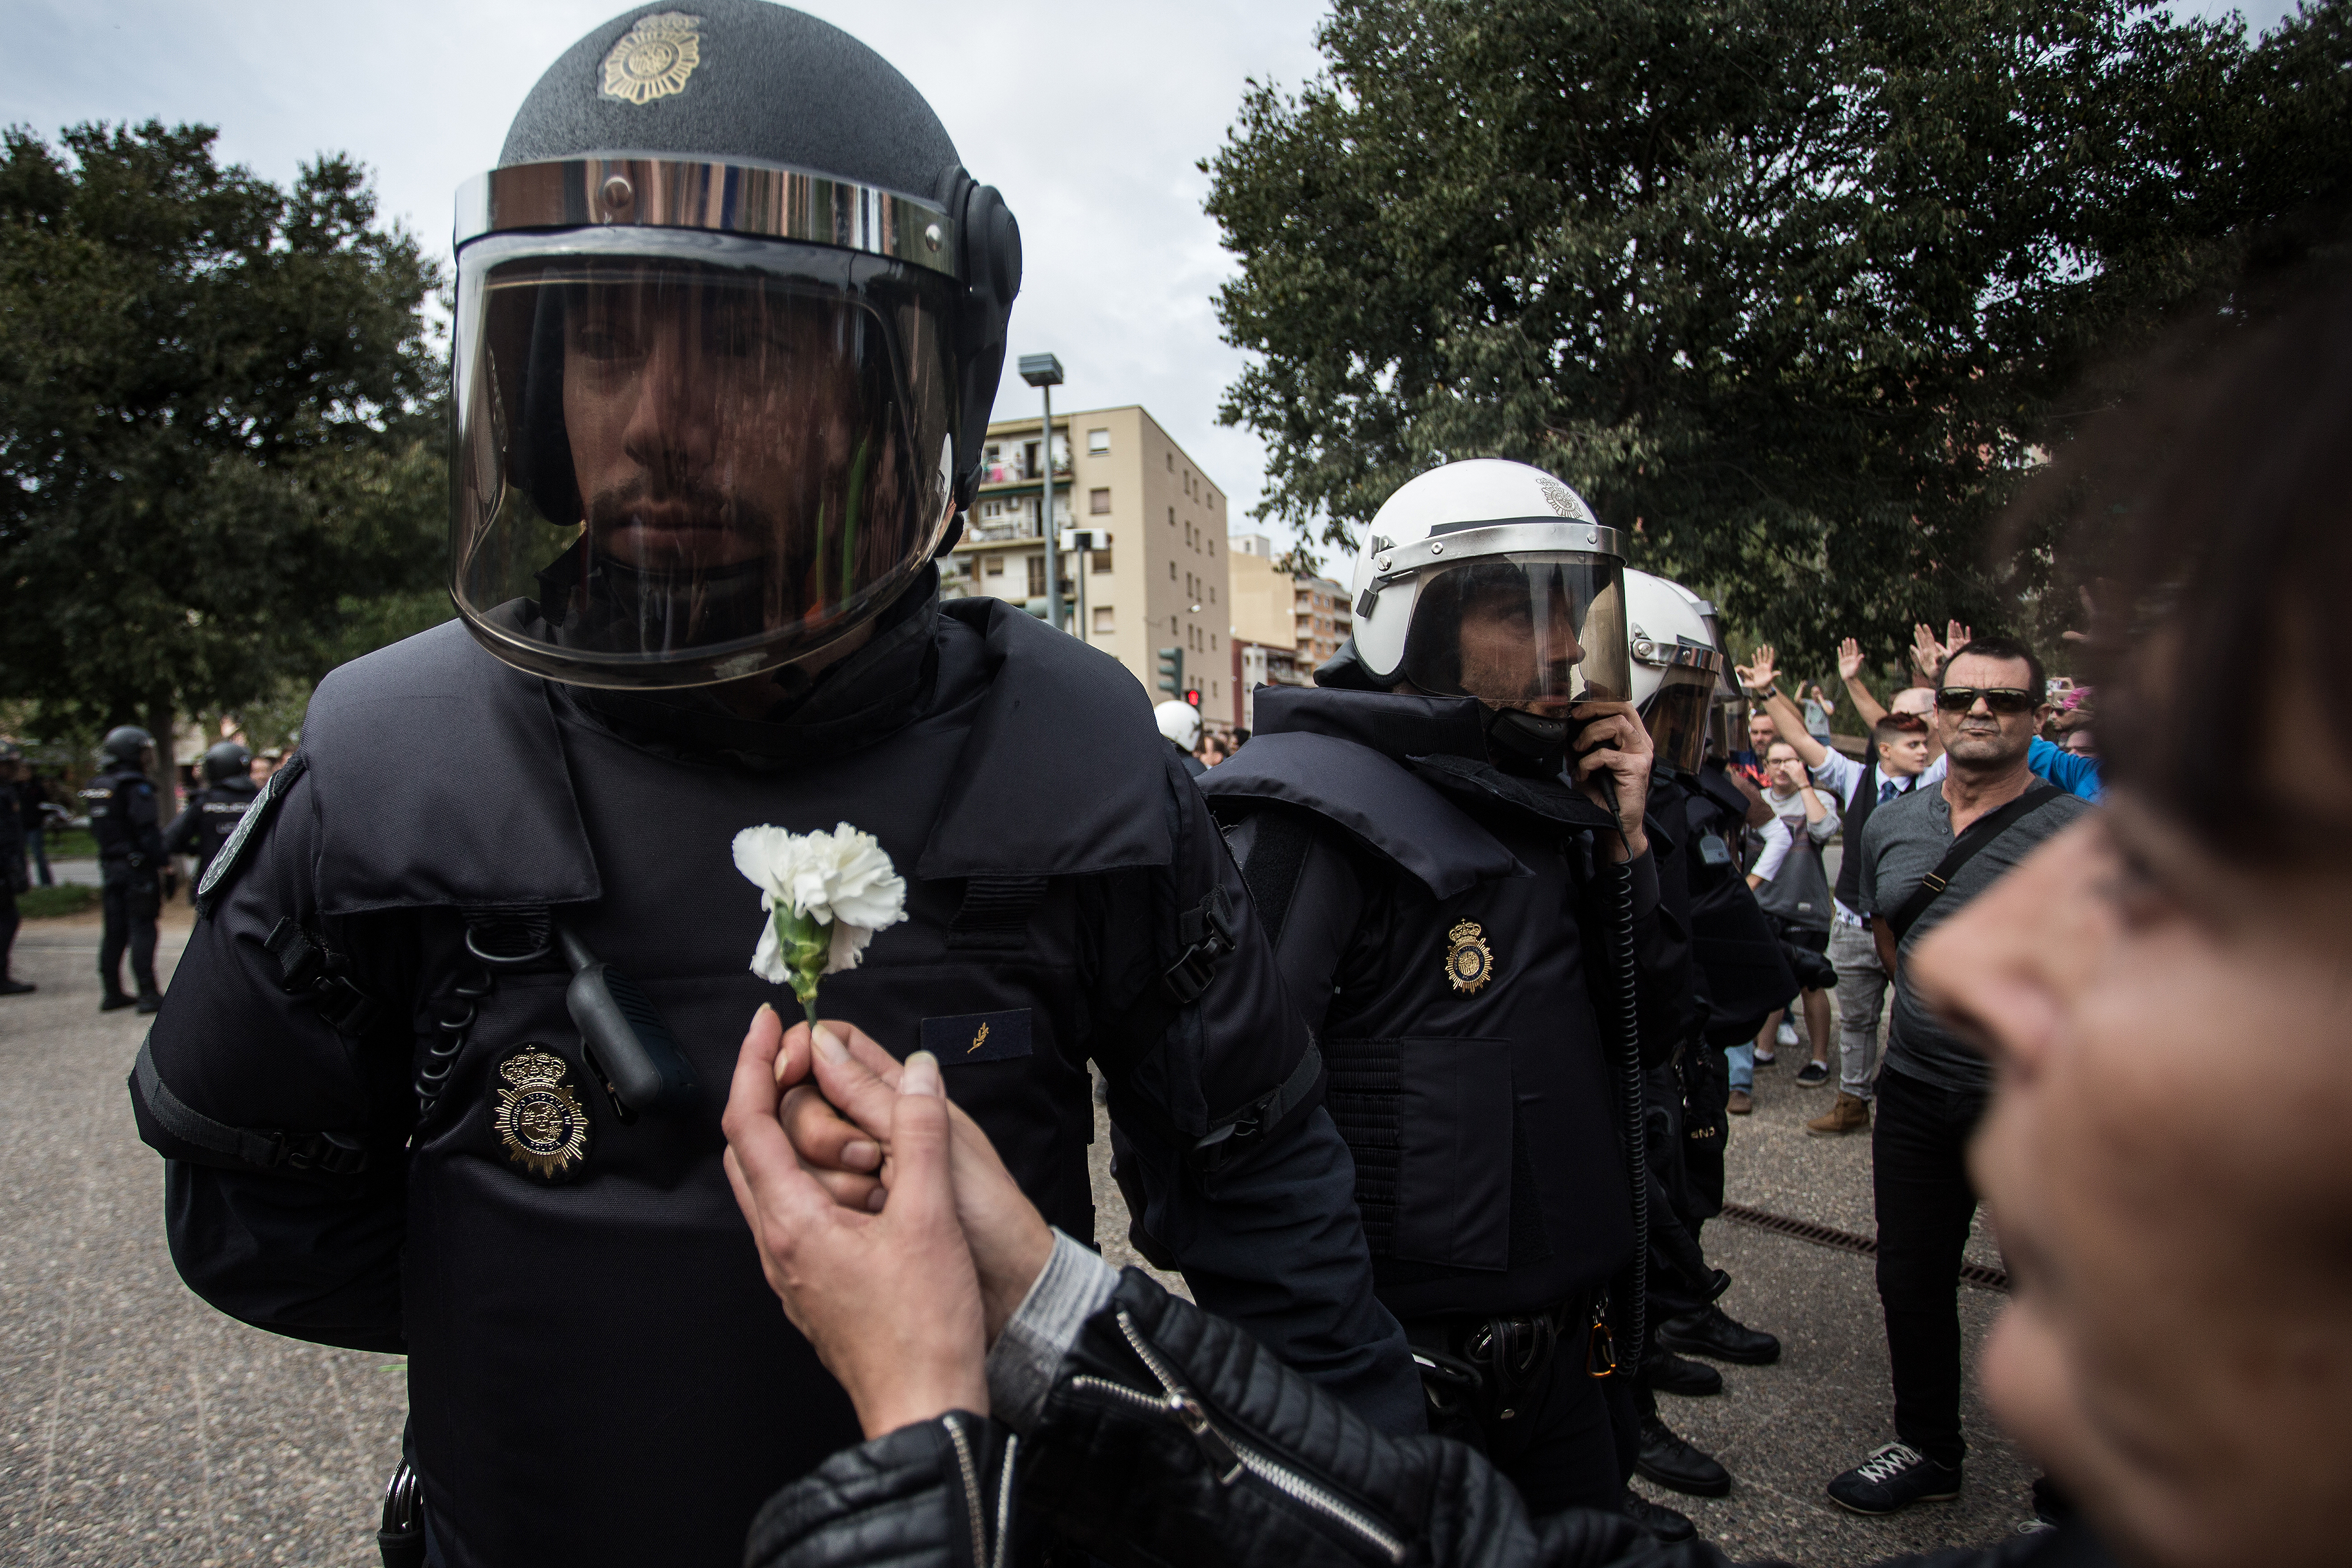 Voter holding a flower in front of a police officer in the October 1 referendum (by Carles Palacio)